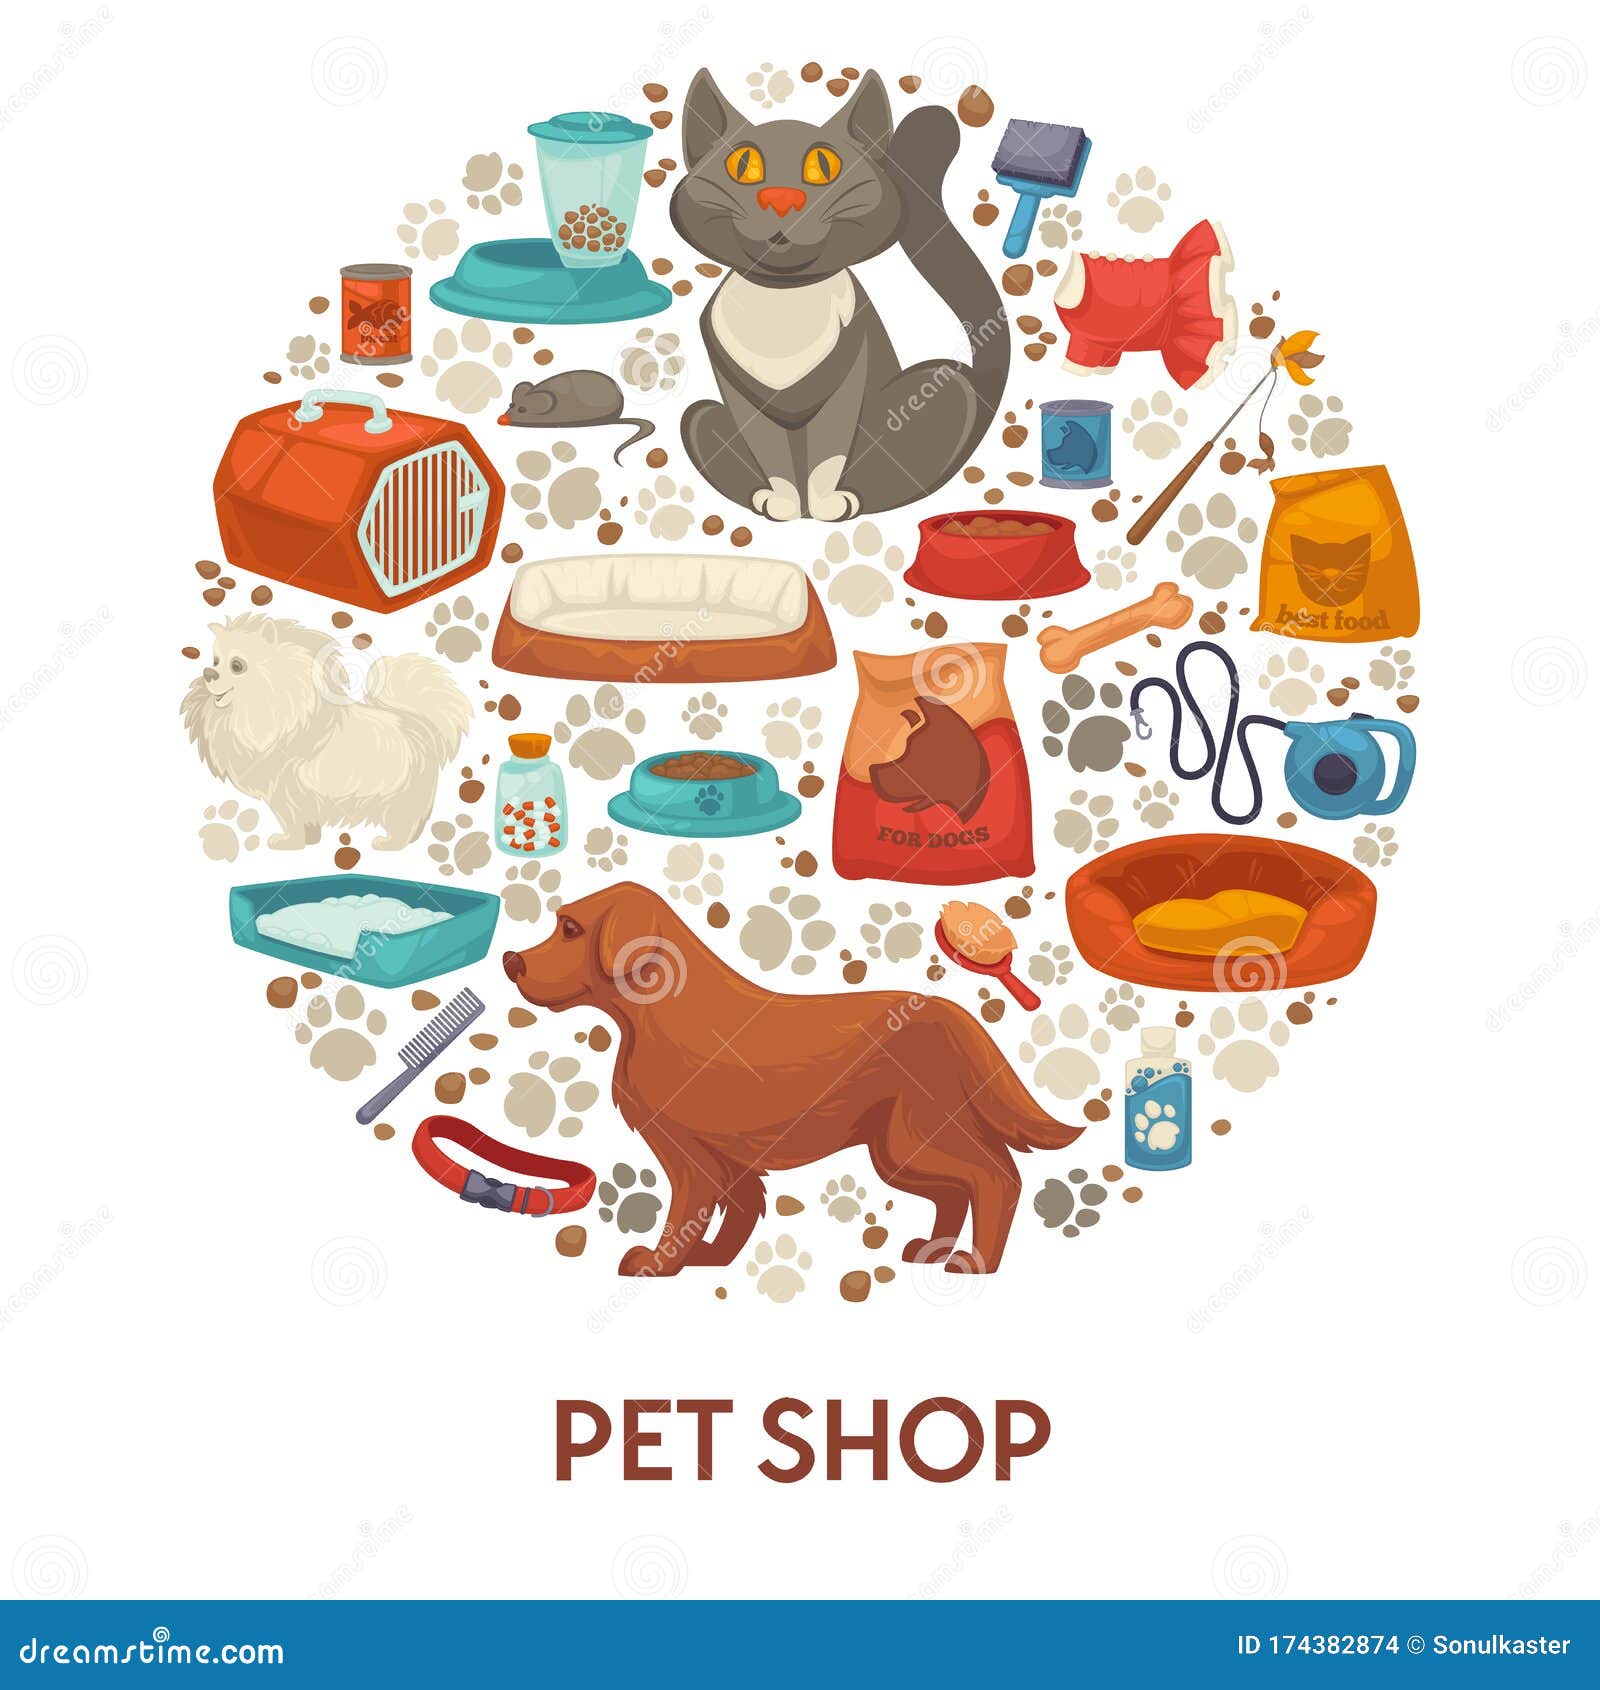 https://thumbs.dreamstime.com/z/pet-shop-banner-template-dog-cat-care-accessories-icons-set-circle-food-bowls-grooming-products-toys-domestic-animal-174382874.jpg